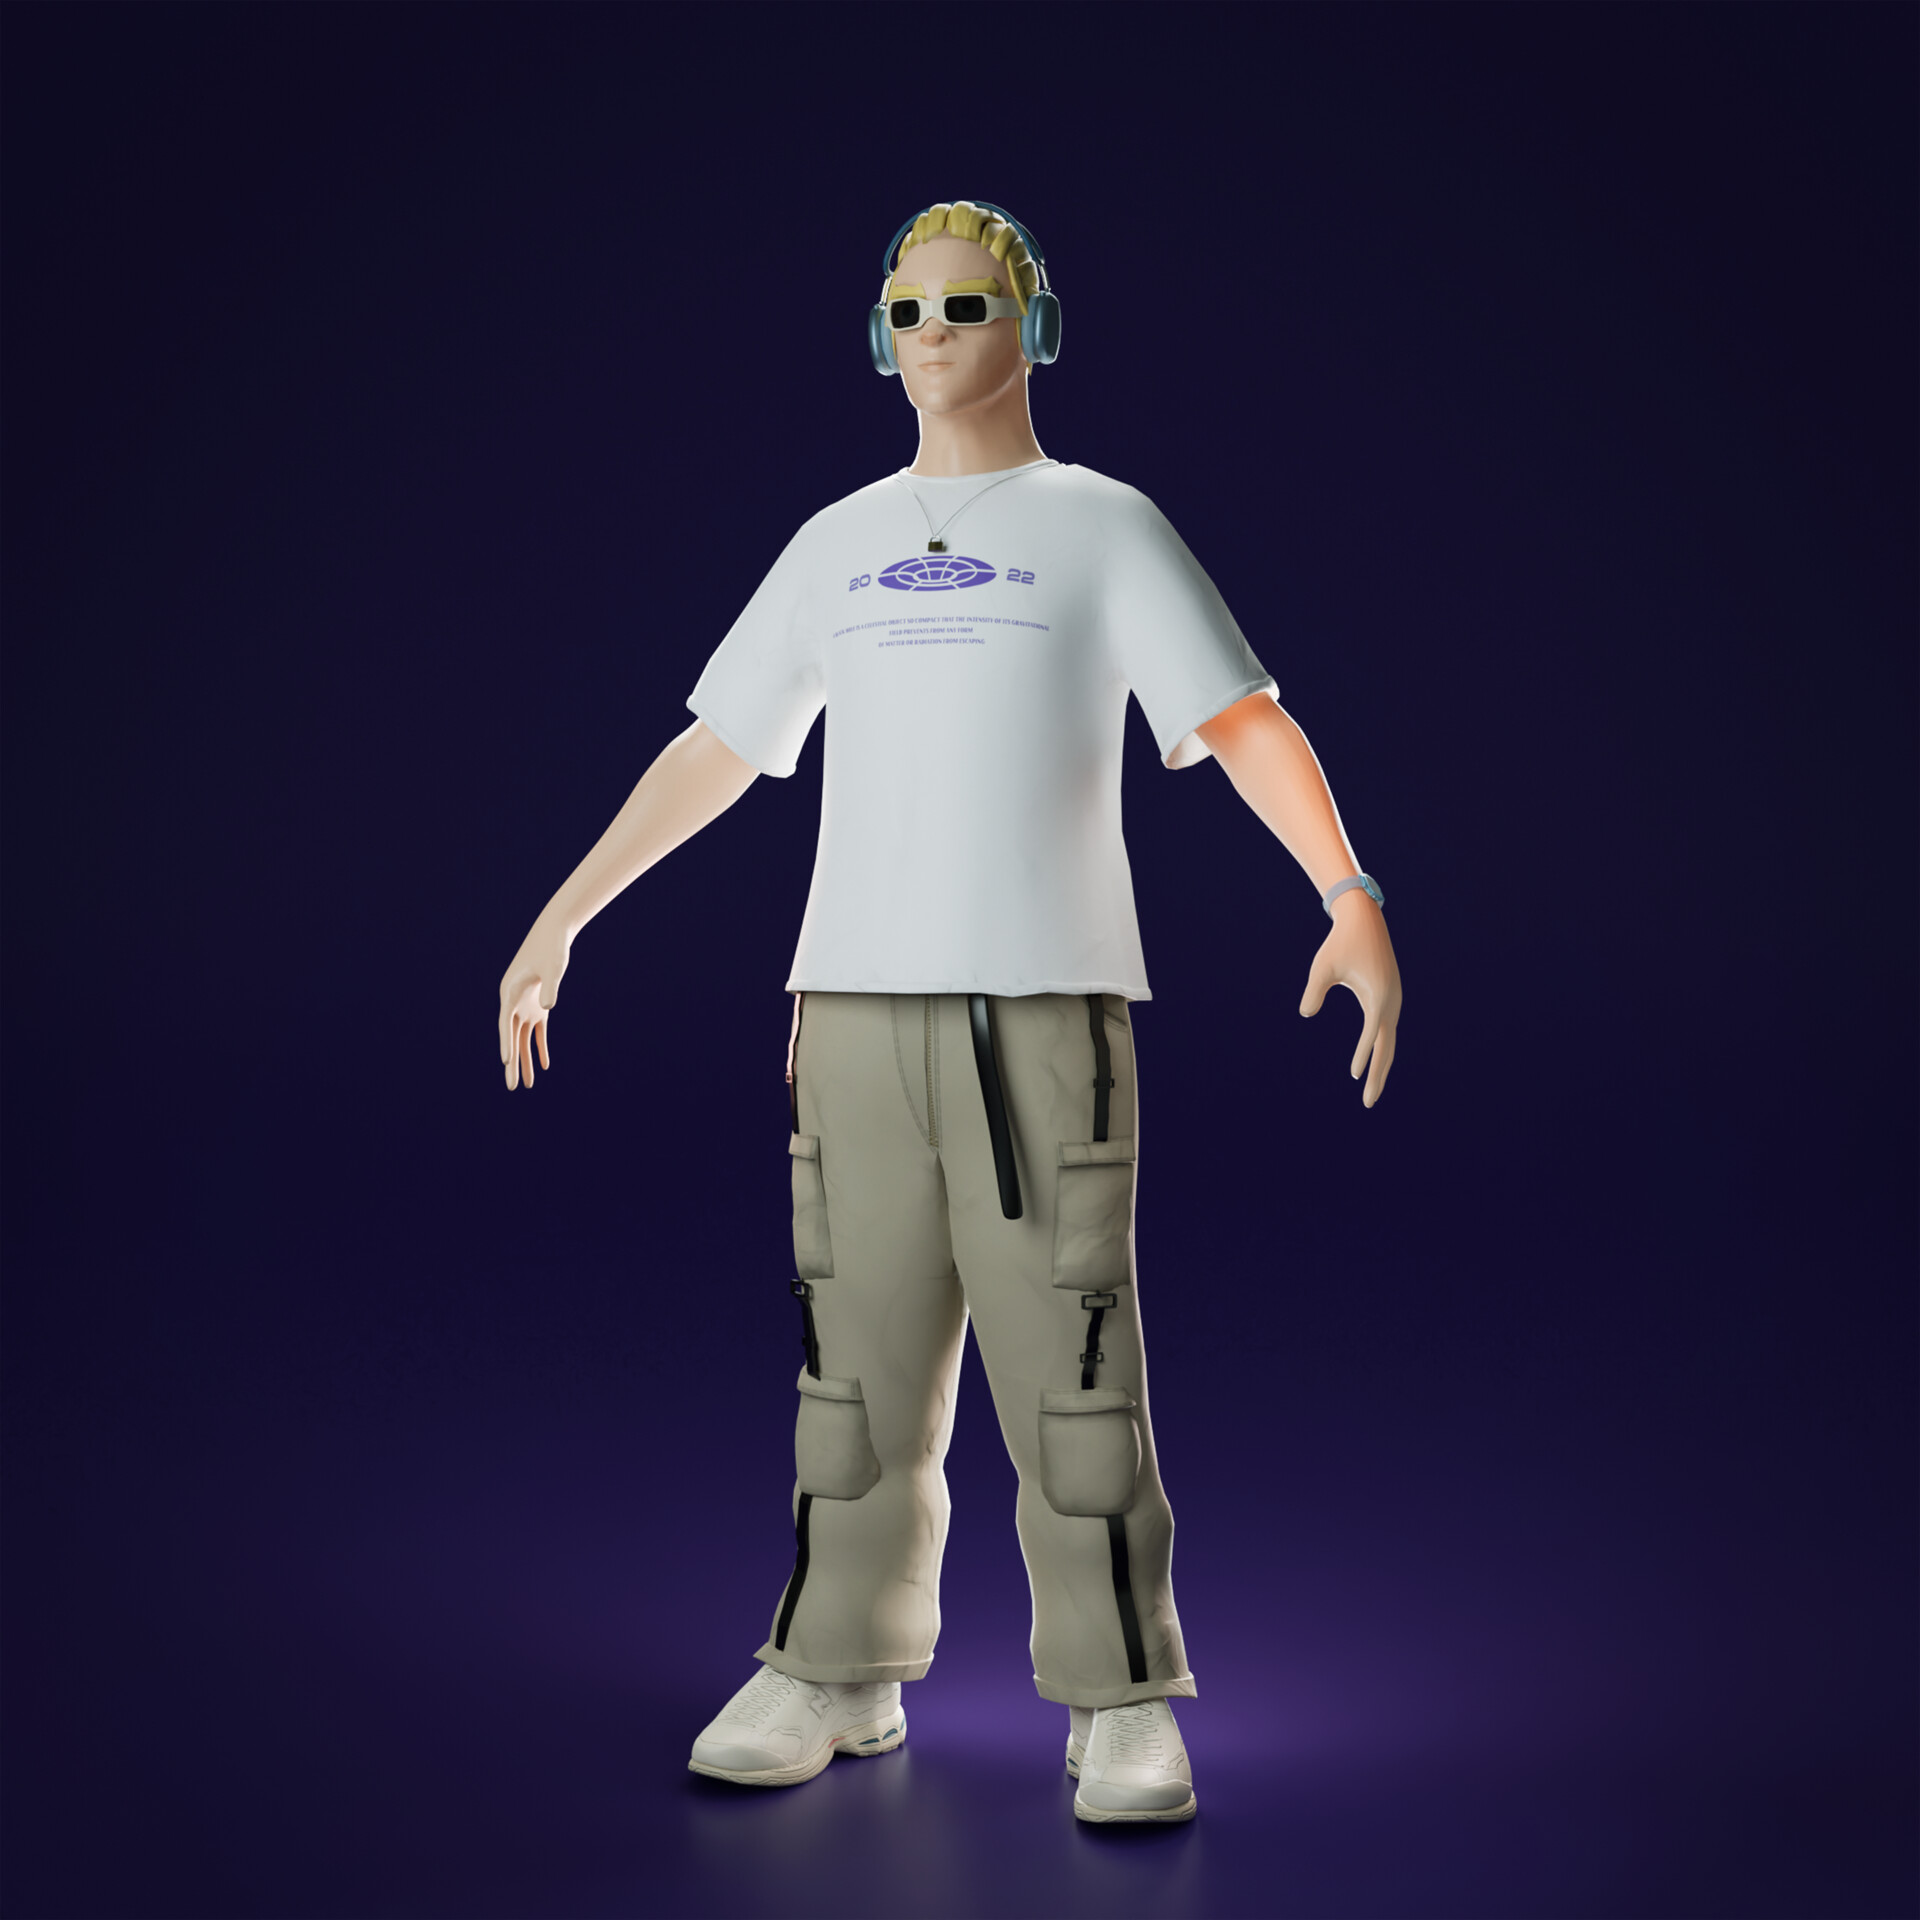 standing still all game, T-Pose